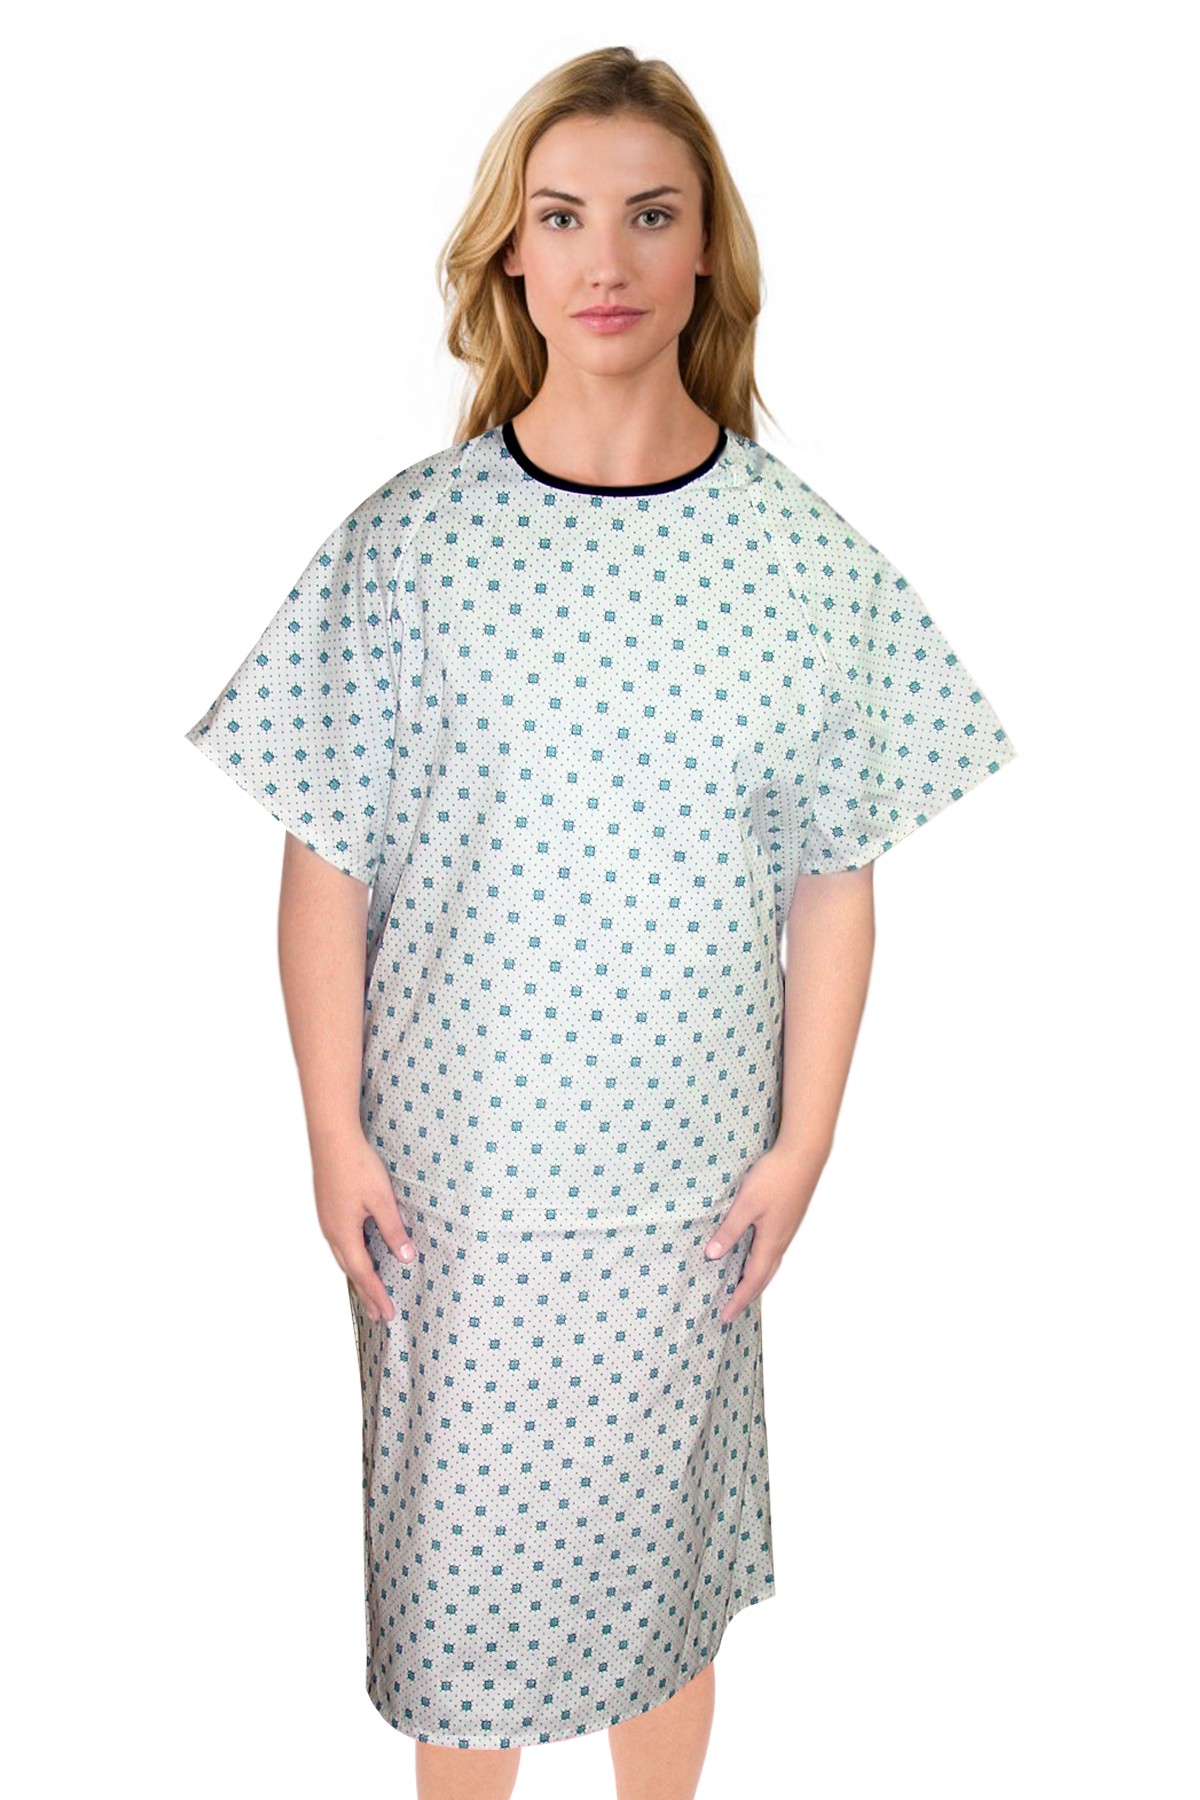 Patient gown half sleeve back open, Green Square Print, Sizes XS-9X